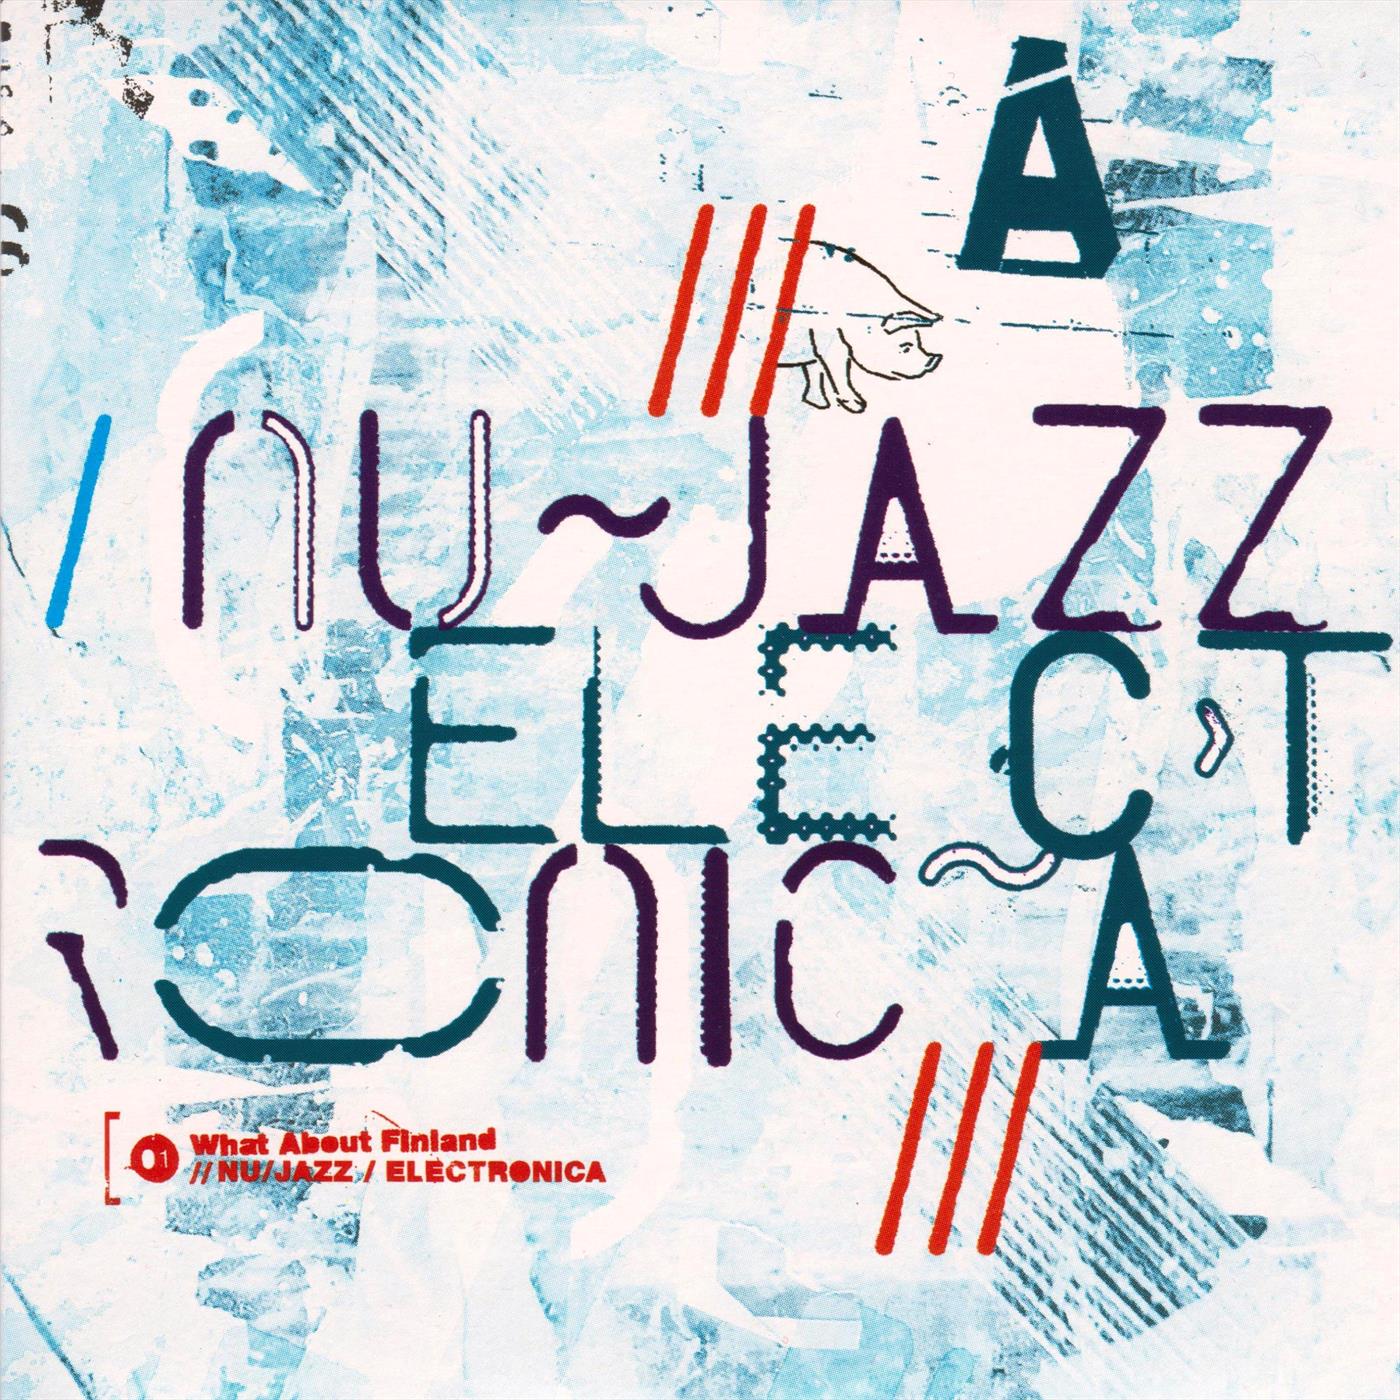 What about Finland - Nu Jazz / Electronica